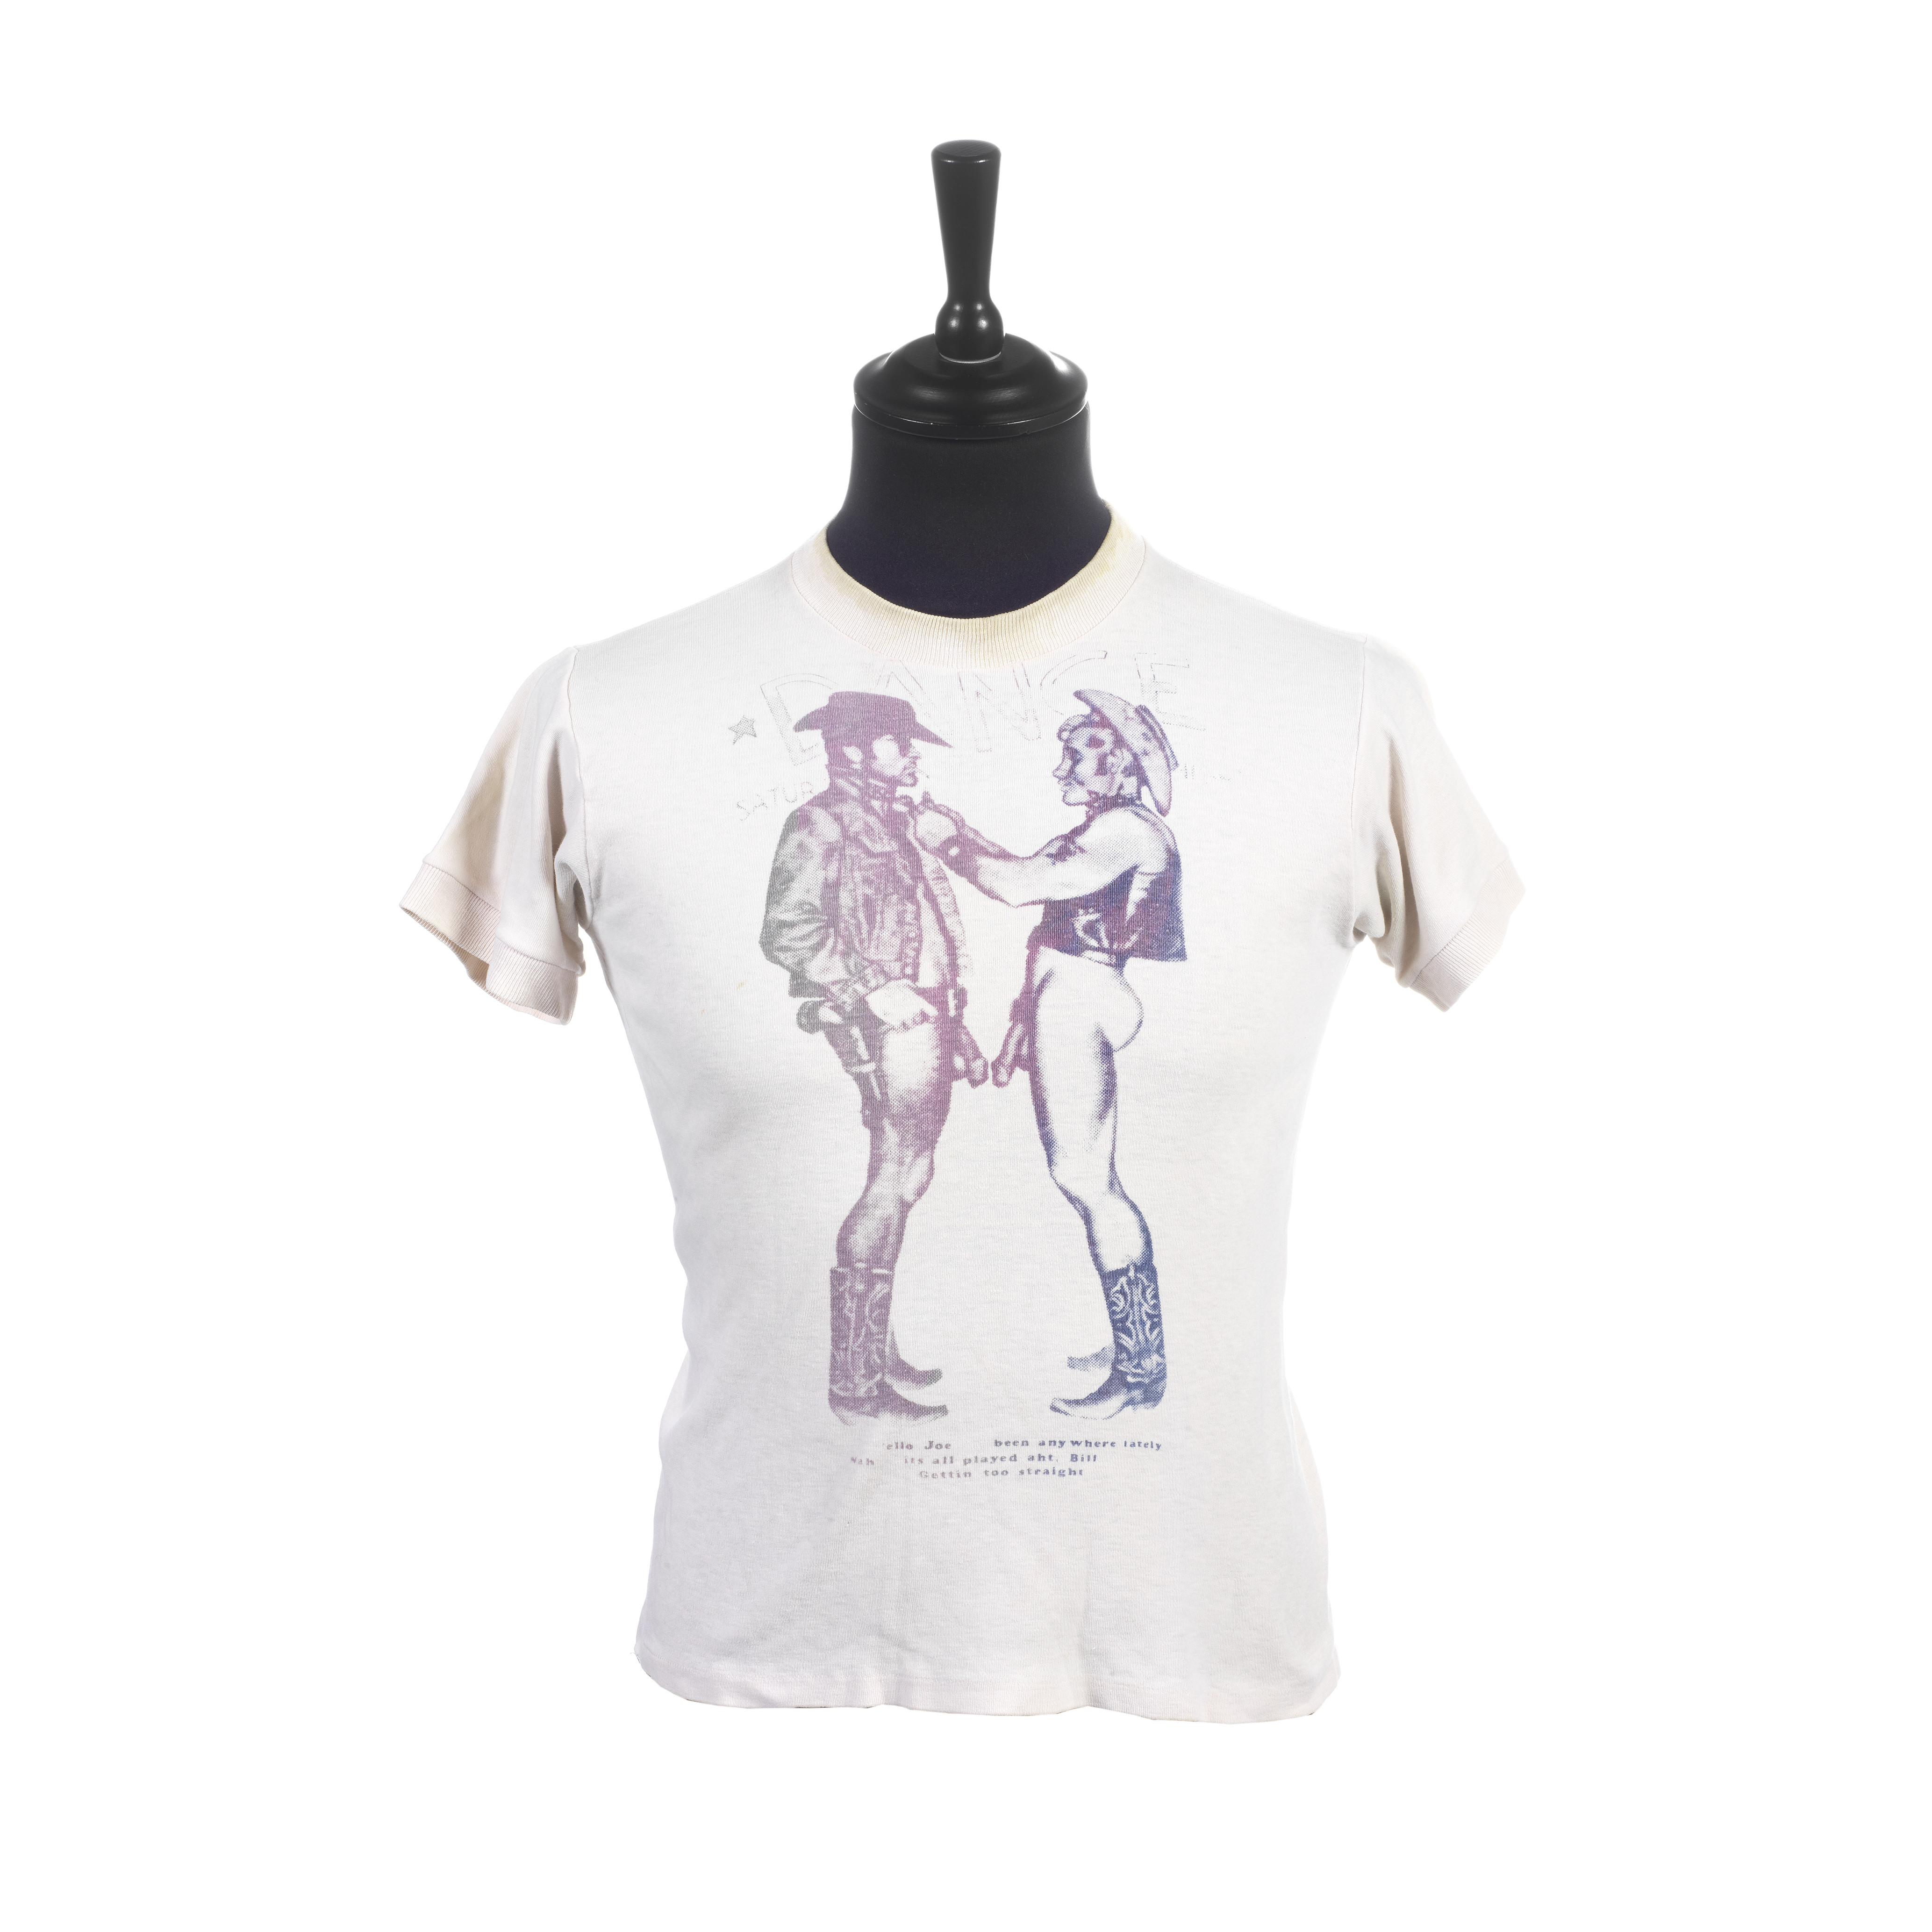 An original and rare pink “Two Cowboys” T-shirt by Westwood and McLaren, 1975.